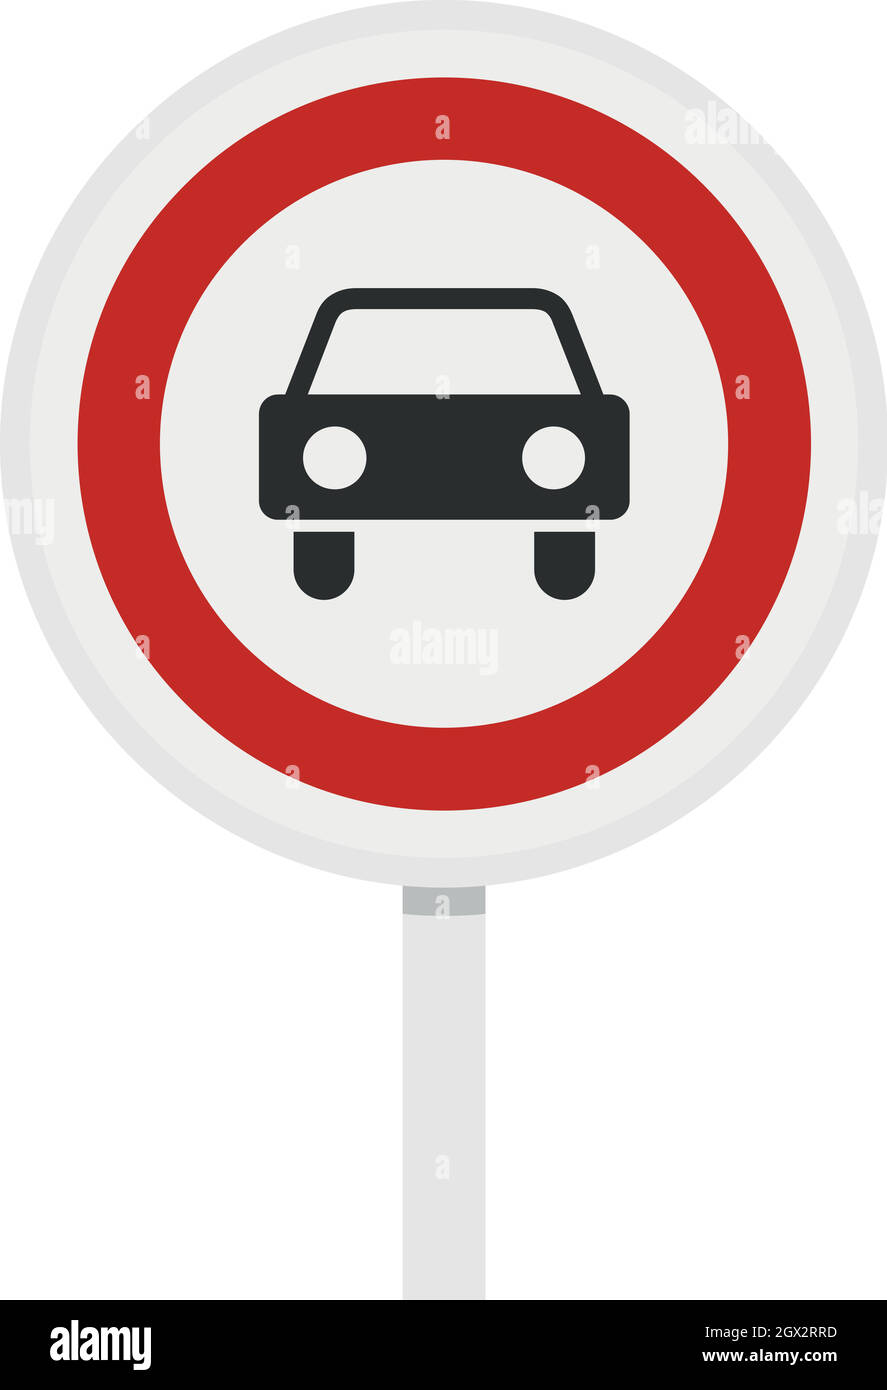 Movement of motor vehicles is forbidden icon Stock Vector